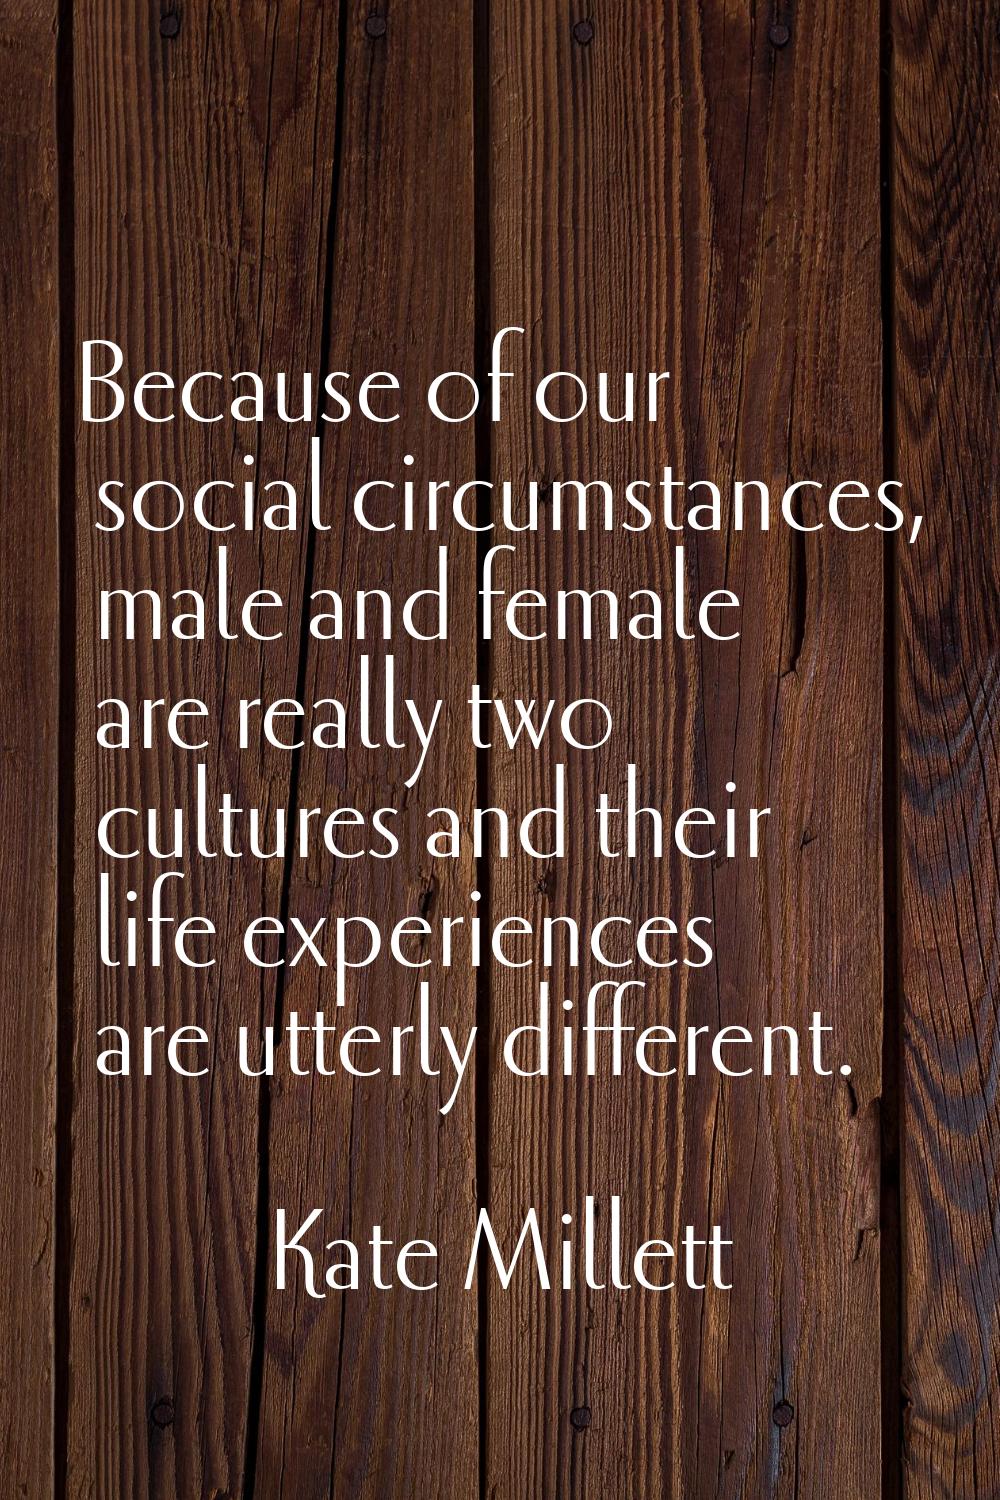 Because of our social circumstances, male and female are really two cultures and their life experie